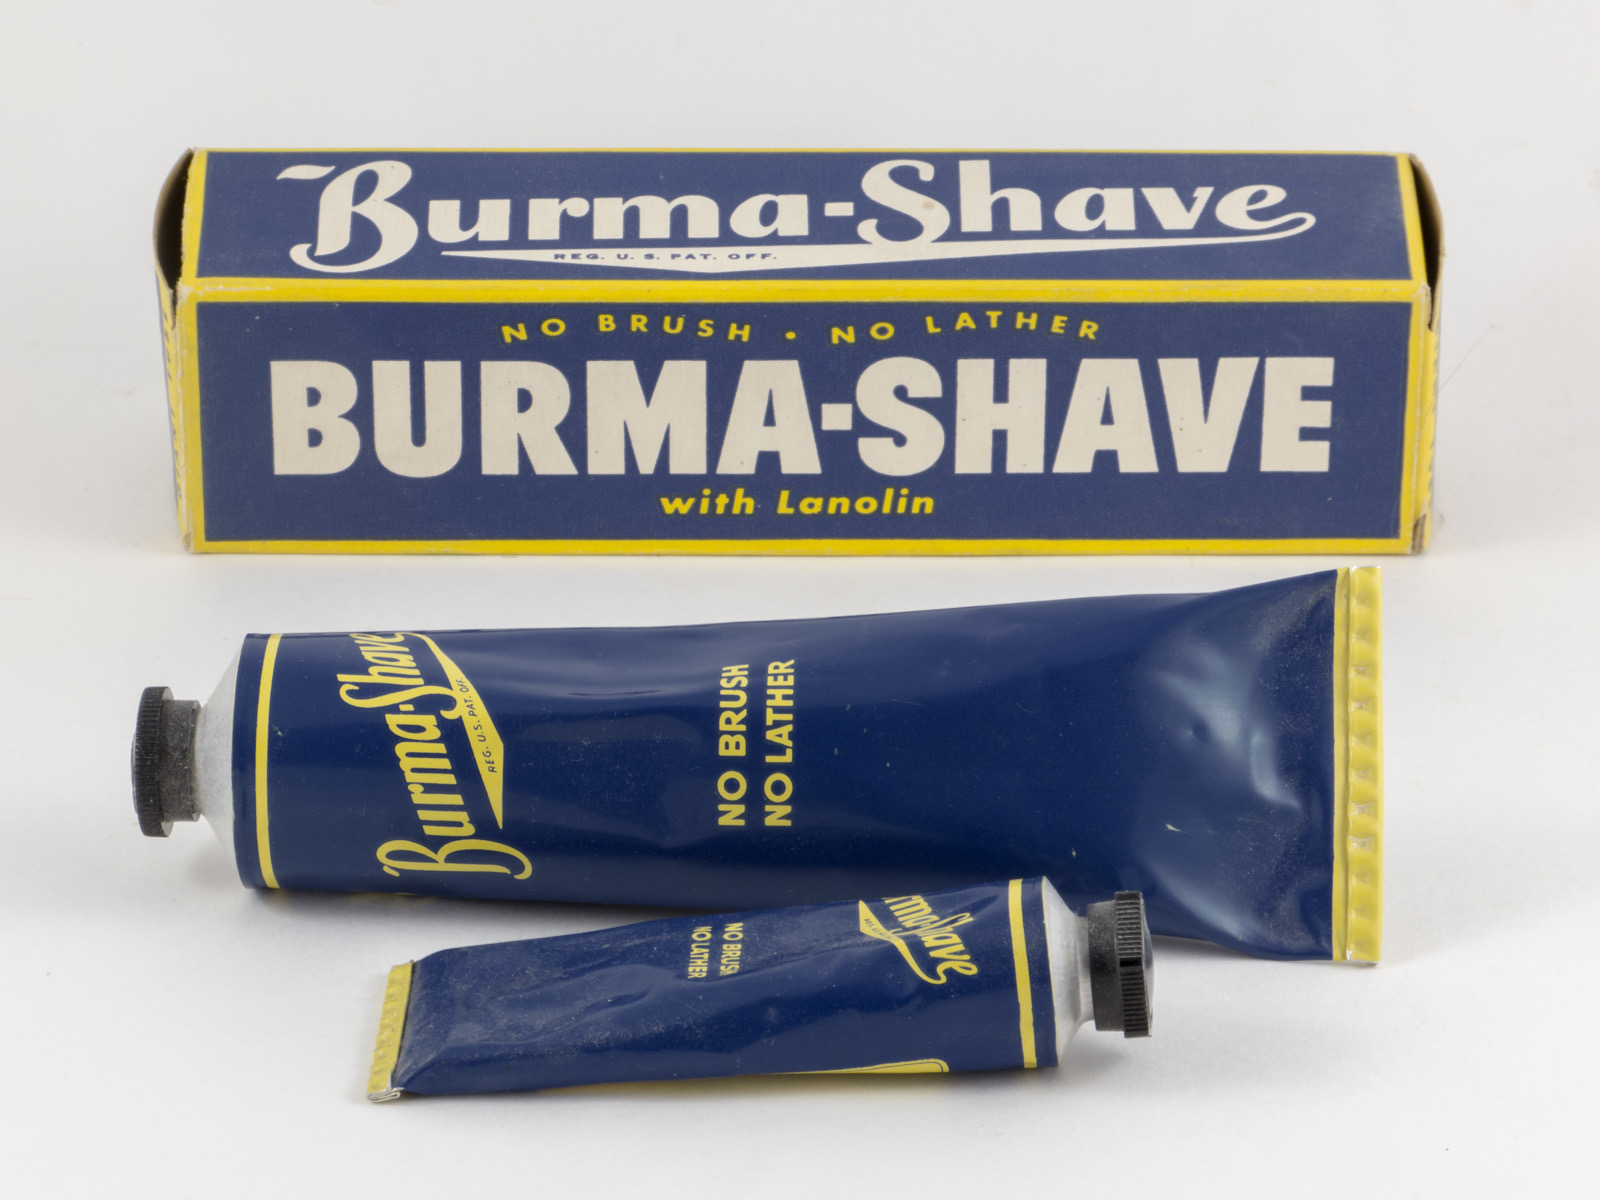 Burma-Shave, If you don’t know whose signs these are you can’t have driven very far — Burma-Shave, ClassicCars.com Journal